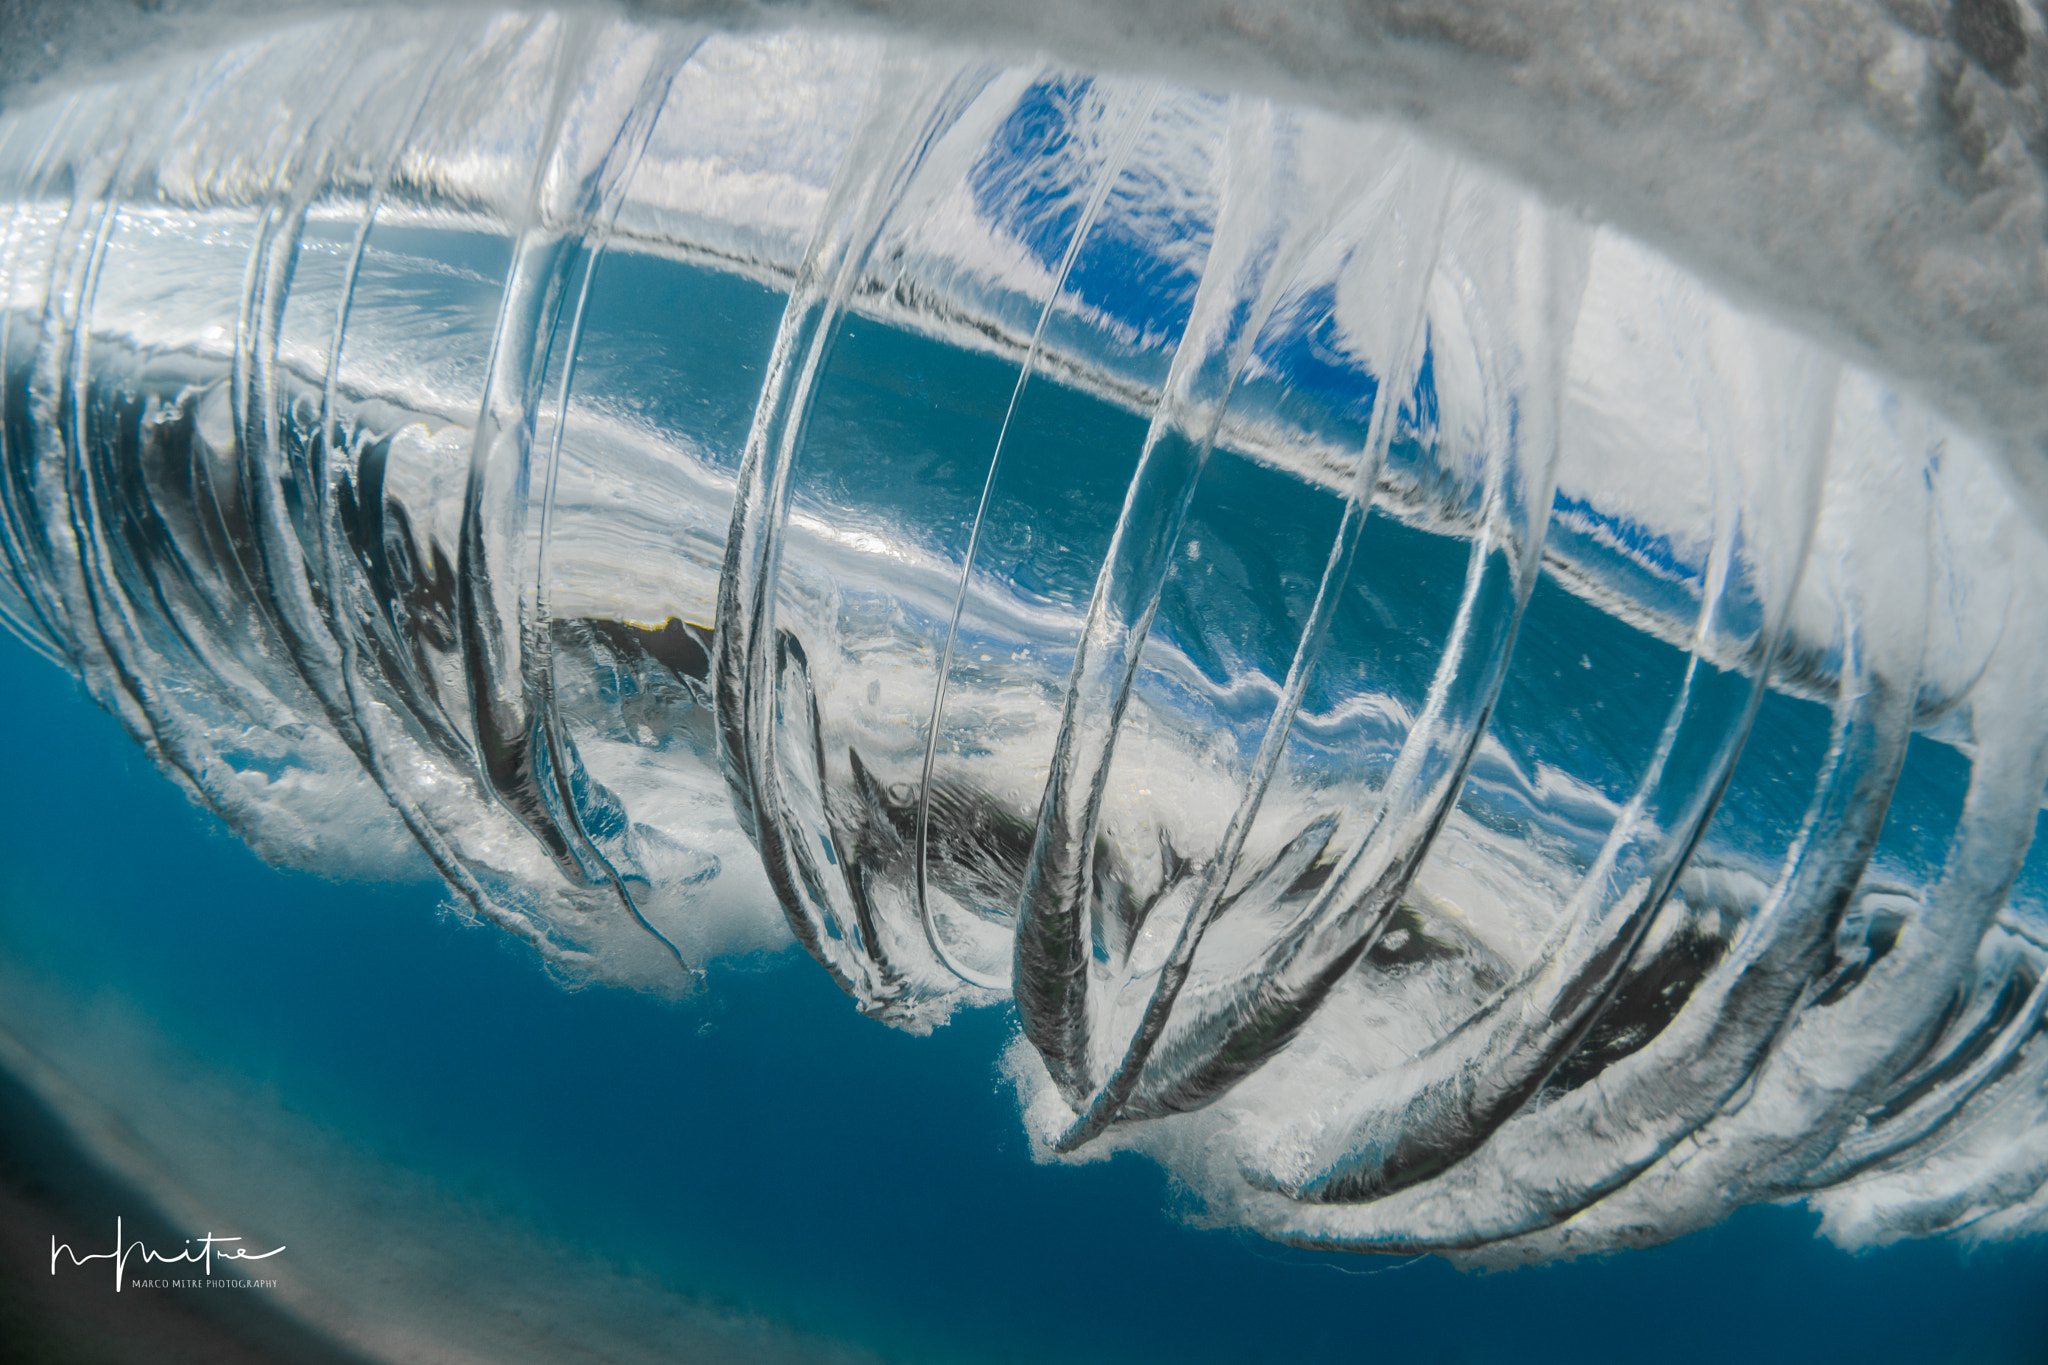 Nikon D500 + Nikon AF DX Fisheye-Nikkor 10.5mm F2.8G ED sample photo. Some underwater photography vortexes created by the rolling waves photography